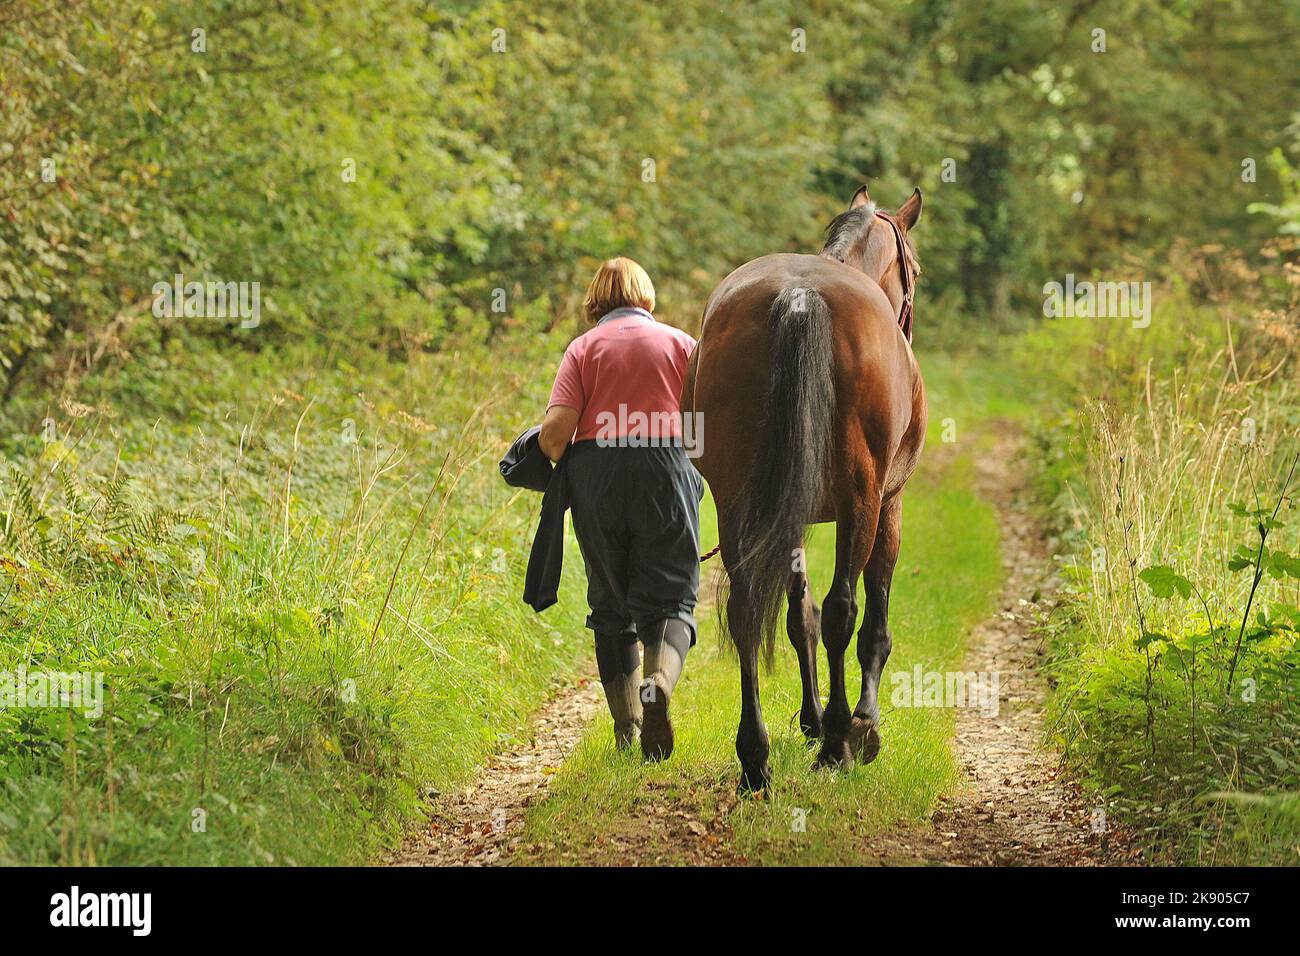 woman leading a horse Stock Photo